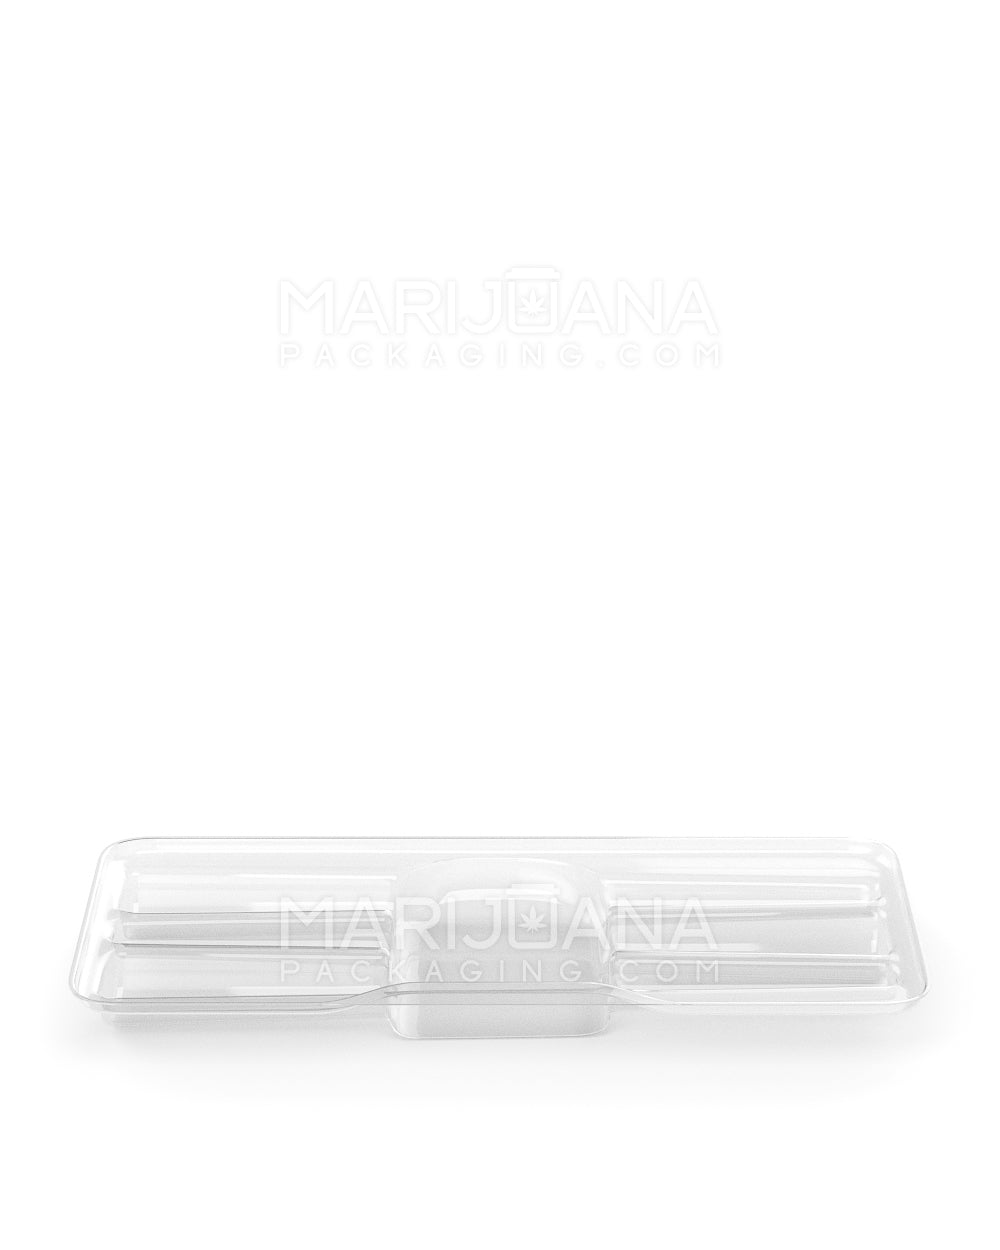 Edible & Joint Box Insert Tray for 3 King Size Pre Rolled Cones | 109mm - Clear Plastic - 100 Count - 5